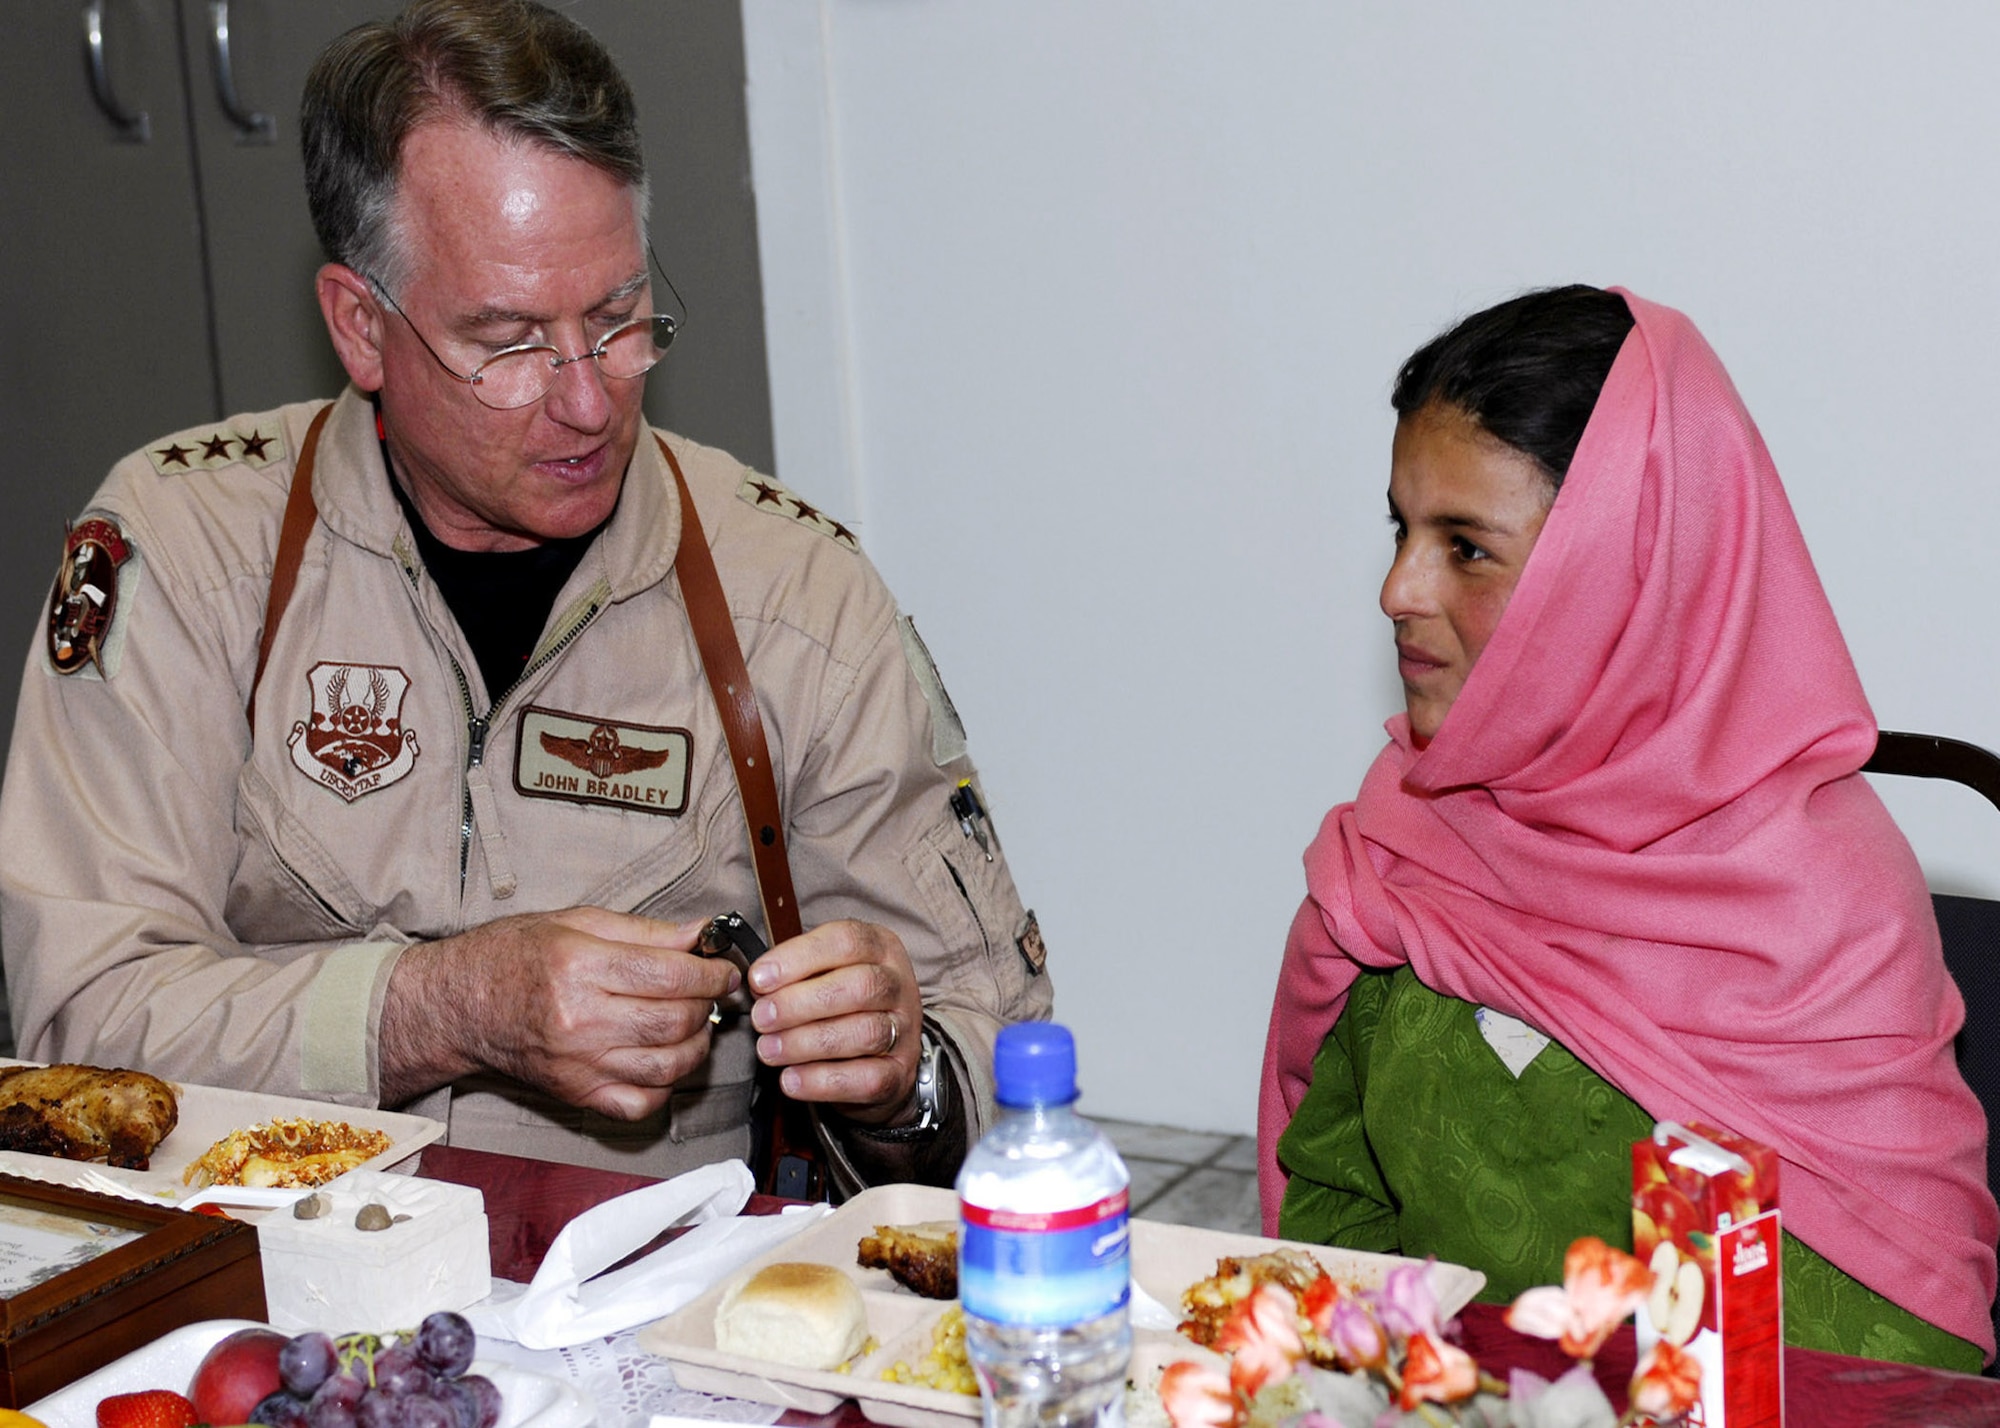 Lt. Gen. John Bradley unclasps a watch for Lamia, a 10-year-old Afghan girl he met last winter during a humanitarian aid drop to her village. Jan Bradley, wife of General Bradley, spearheaded a donation drive that collected several boxes of supplies specifically for Lamia and her village of Shakal and were presented here May 30. General Bradley is the Air Force Reserve Command commander. (U.S. Air Force photo/Capt. Toni Tones)